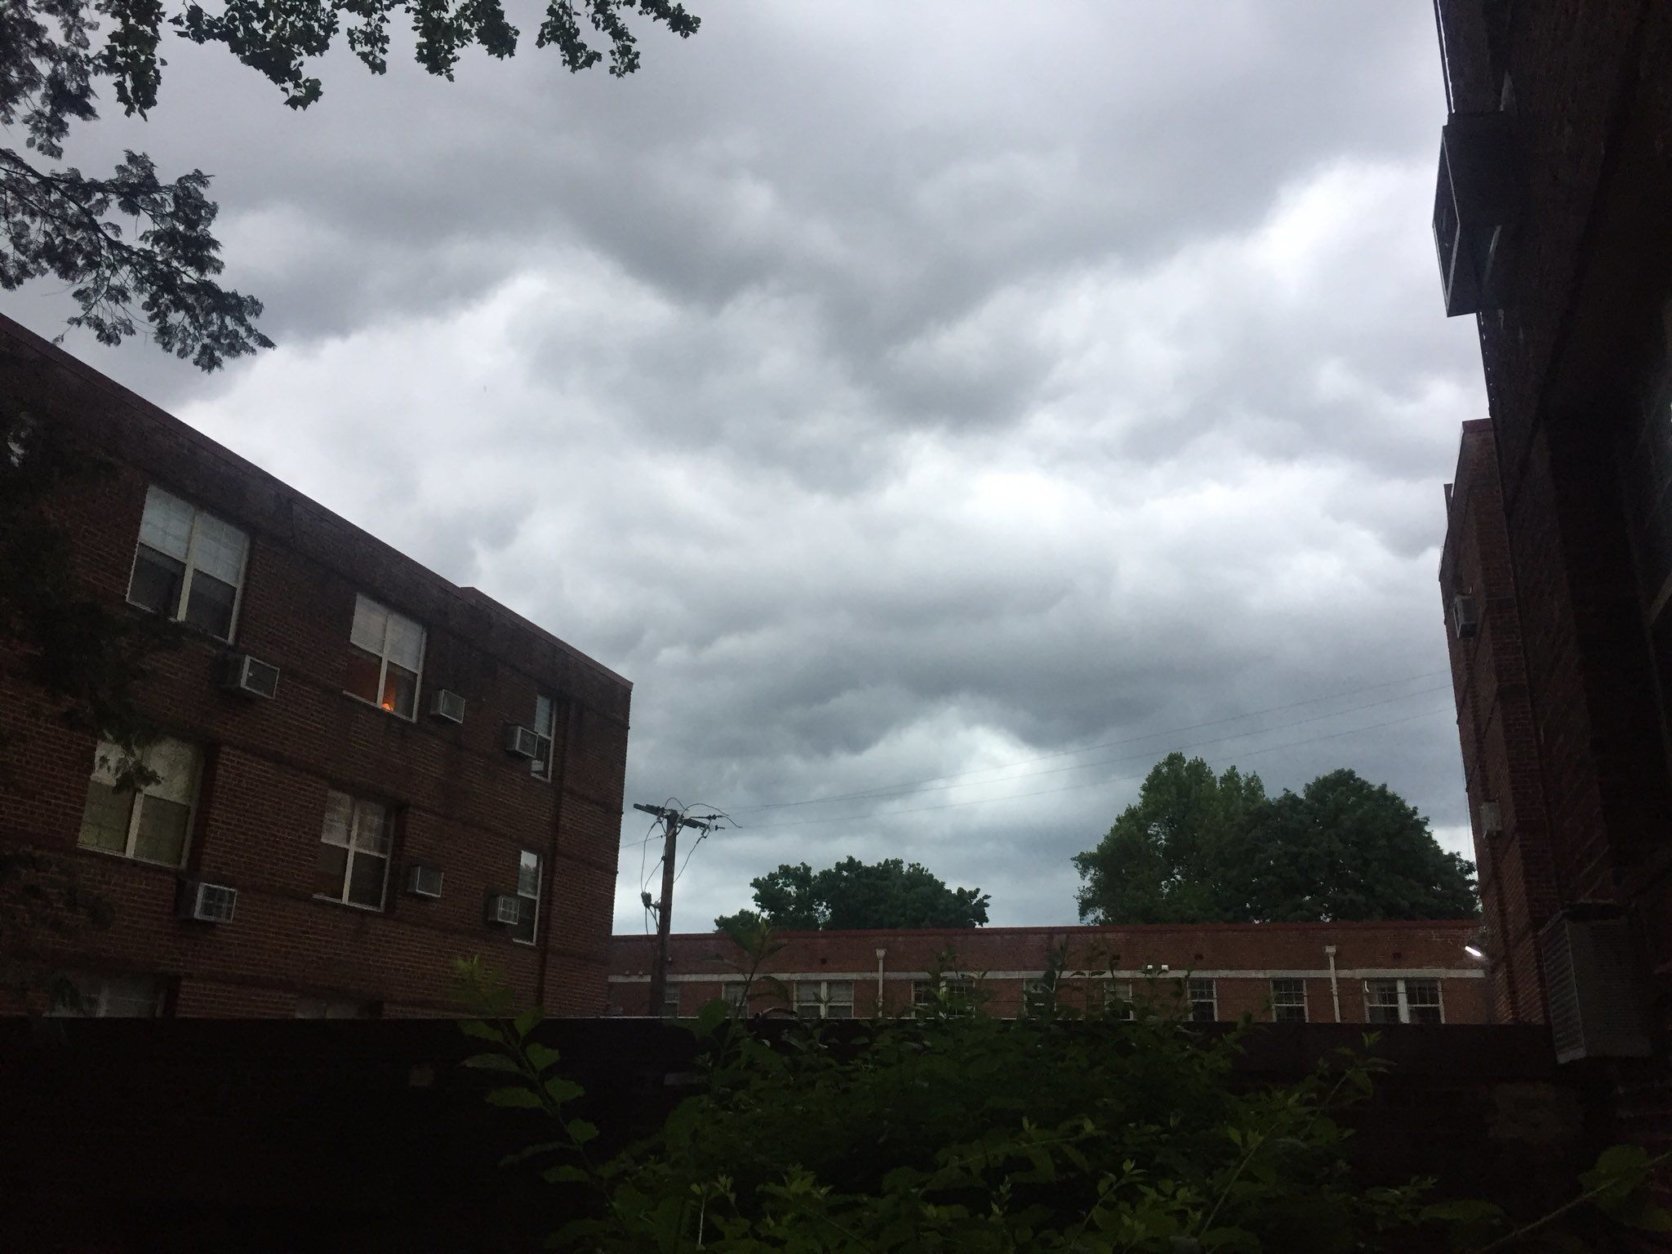 The clouds over Silver Spring, Maryland, give off an ominous feeling on Thursday, May 31, 2018. (WTOP/Patrick Roth)